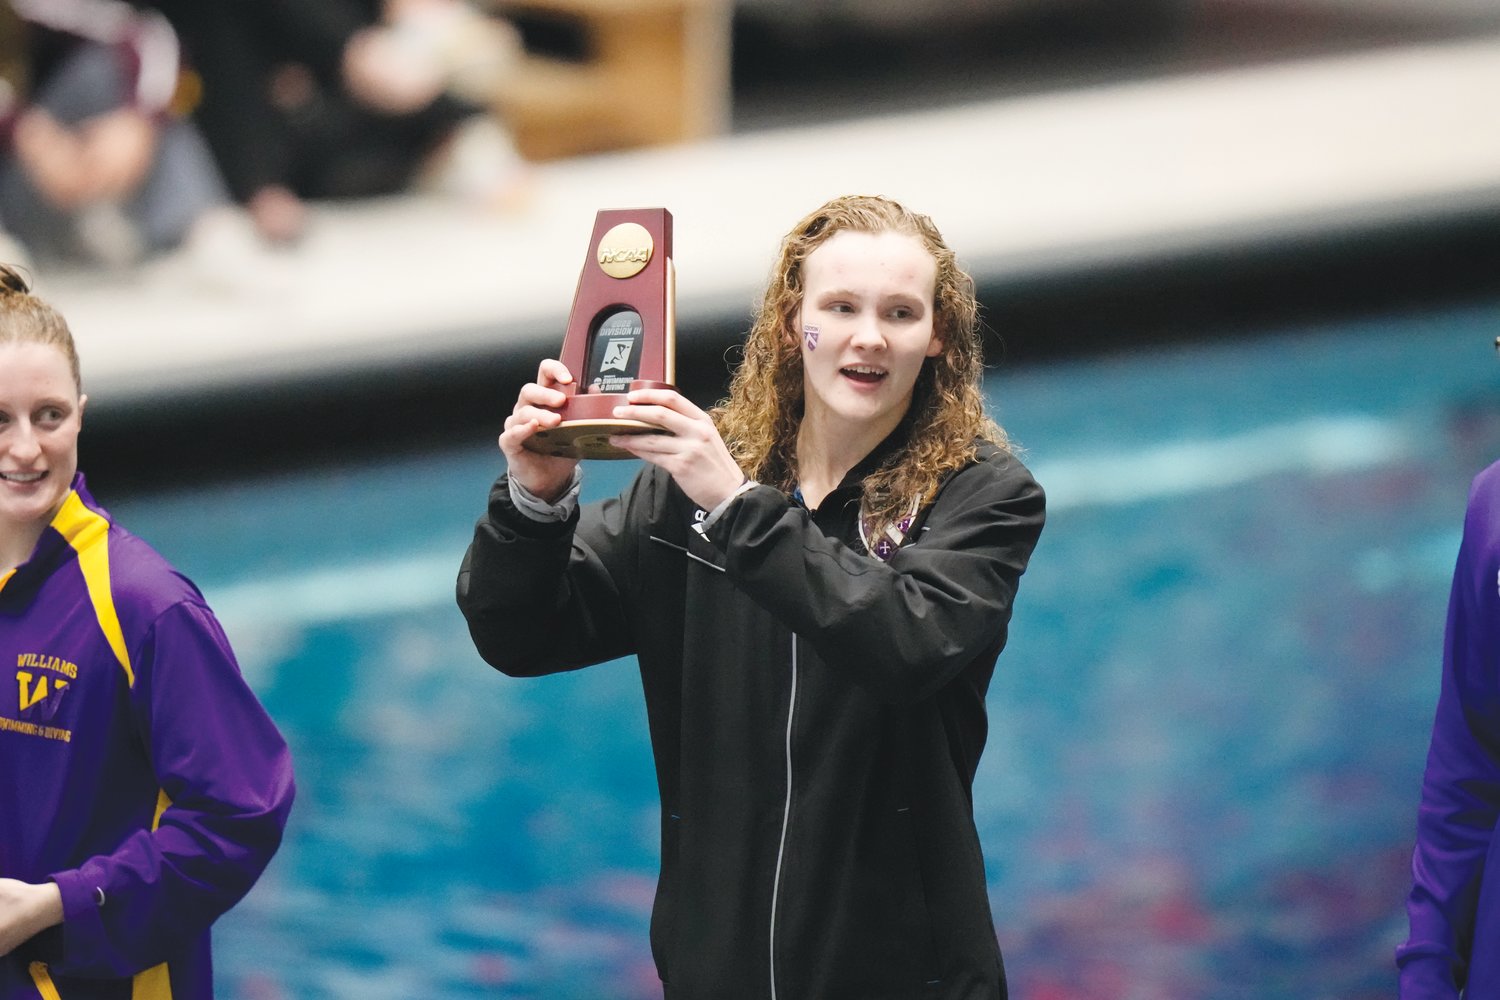 Kenyon swimmer Jennah Fadely hoists a trophy at the NCAA Division III Swimming & Diving National Championships. Fadely took 1st place in two relay races and 3rd place in two invidual breaststroke races.